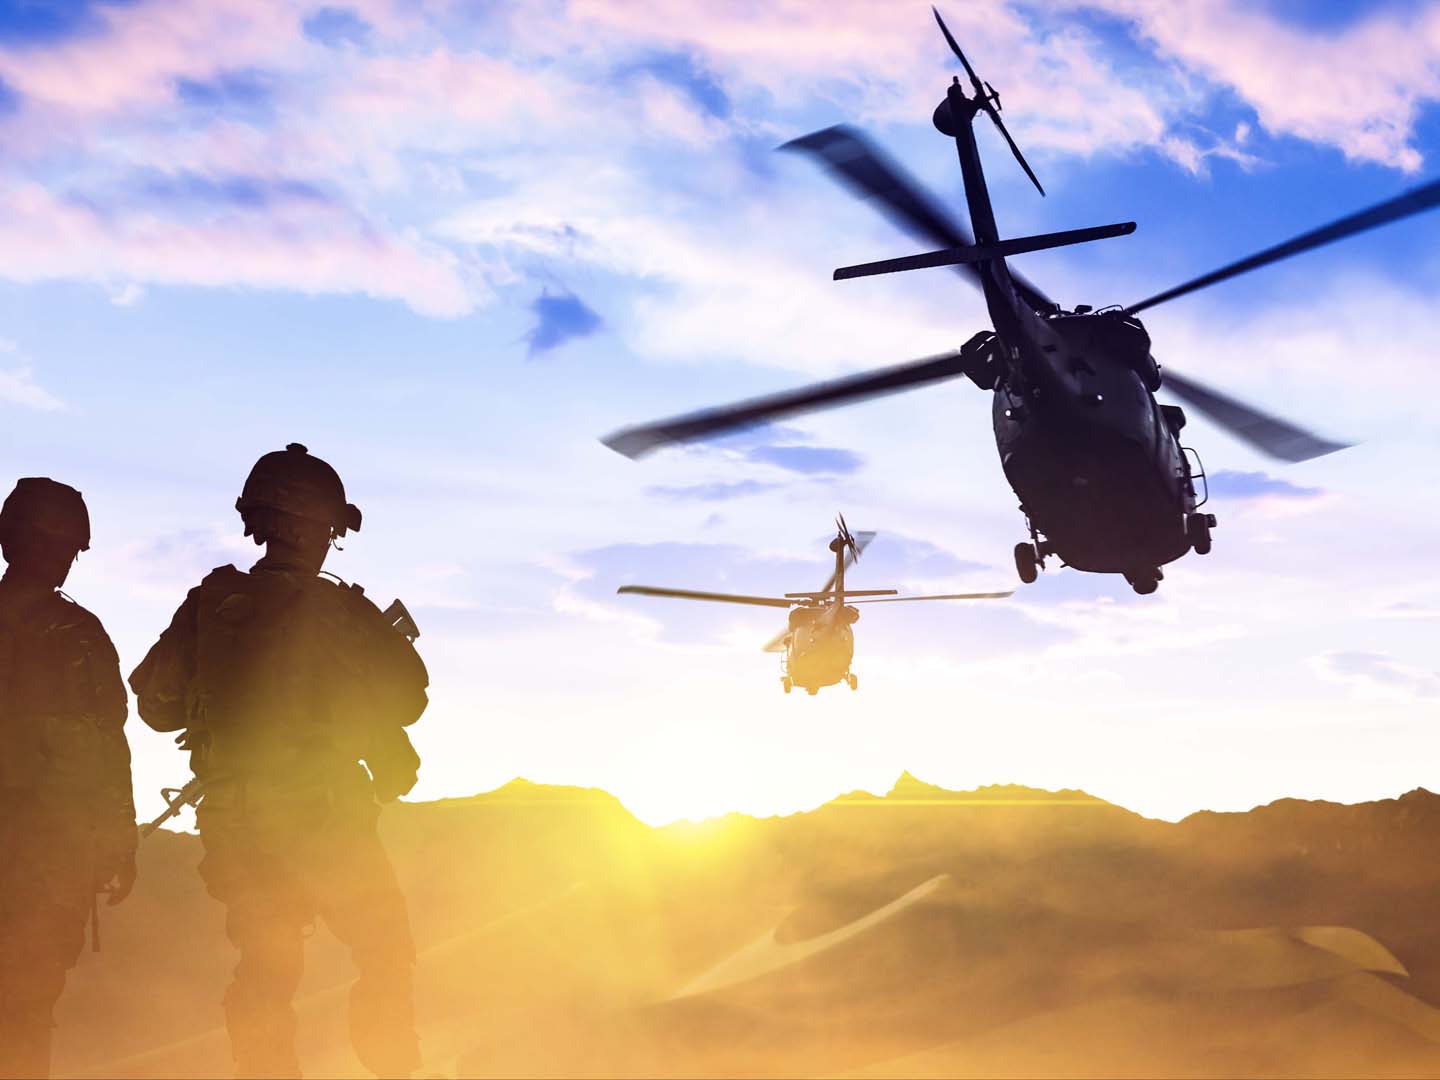 A military helicopter flies over troops on the ground at sunset.